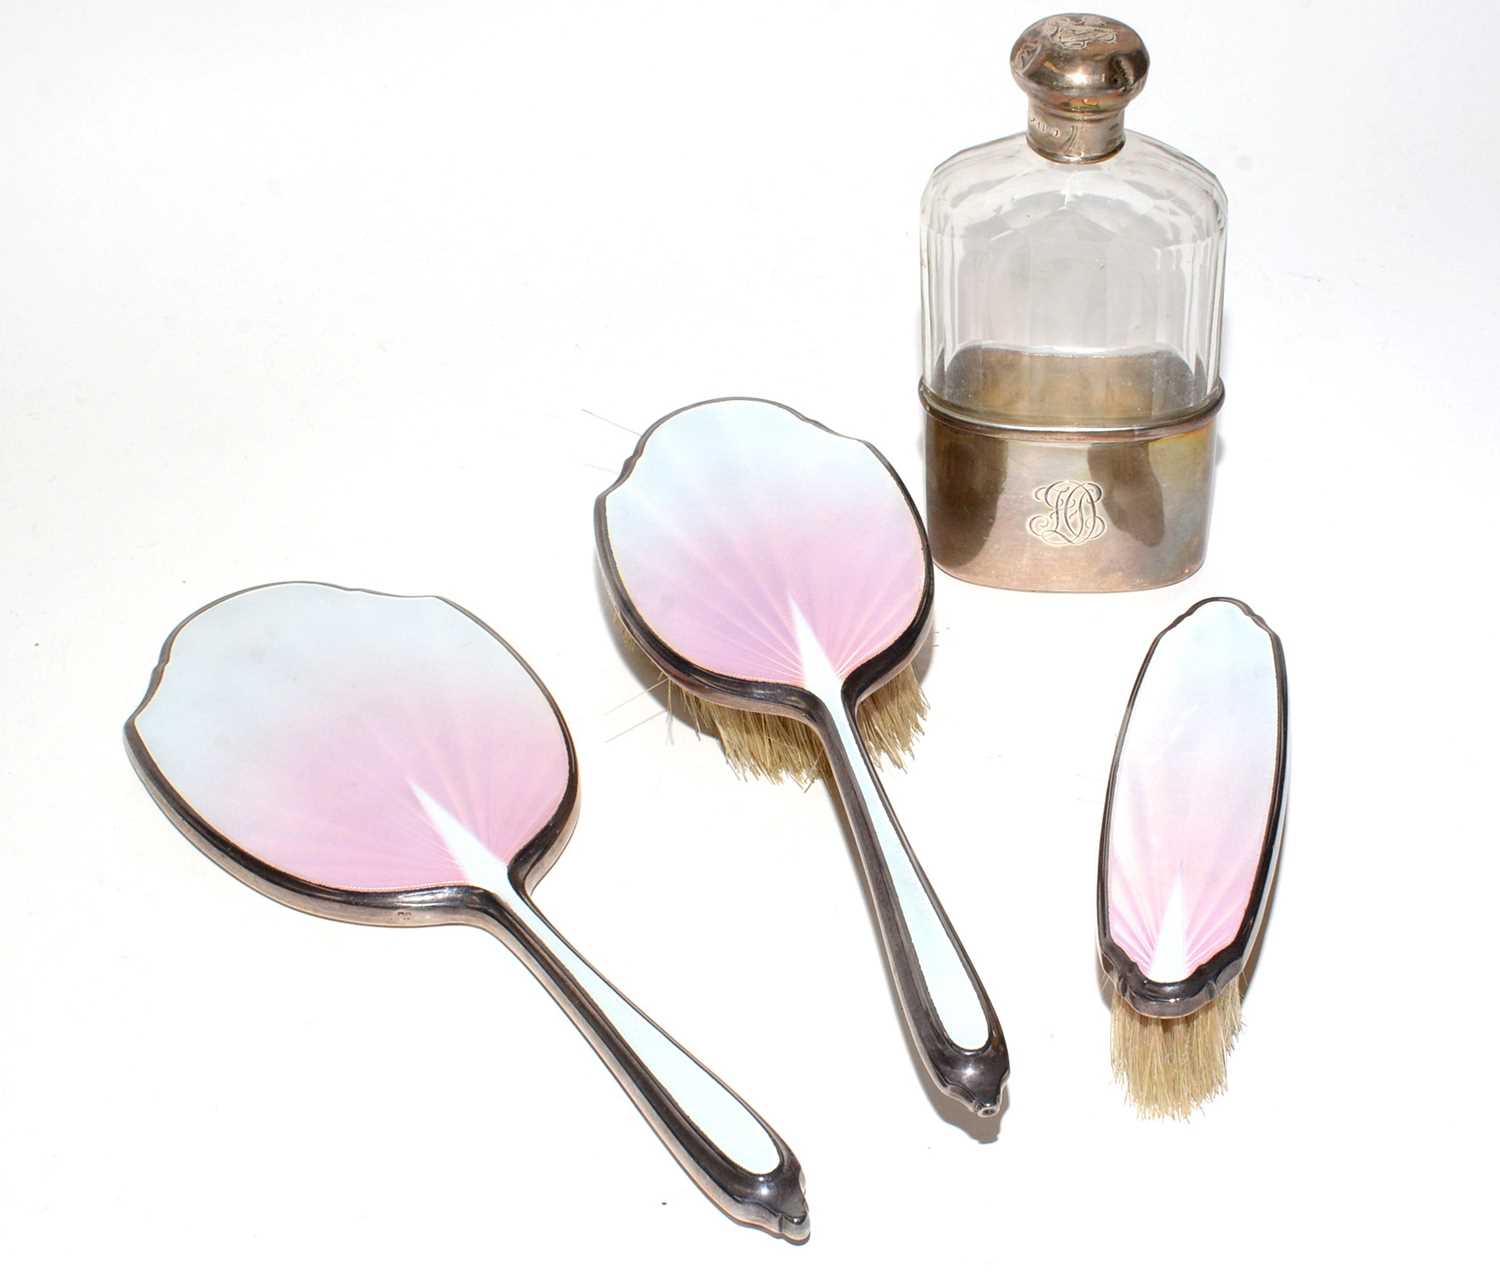 Lot 188 - Silver-backed hand mirror, bush and clothes brush; and a hip flask.